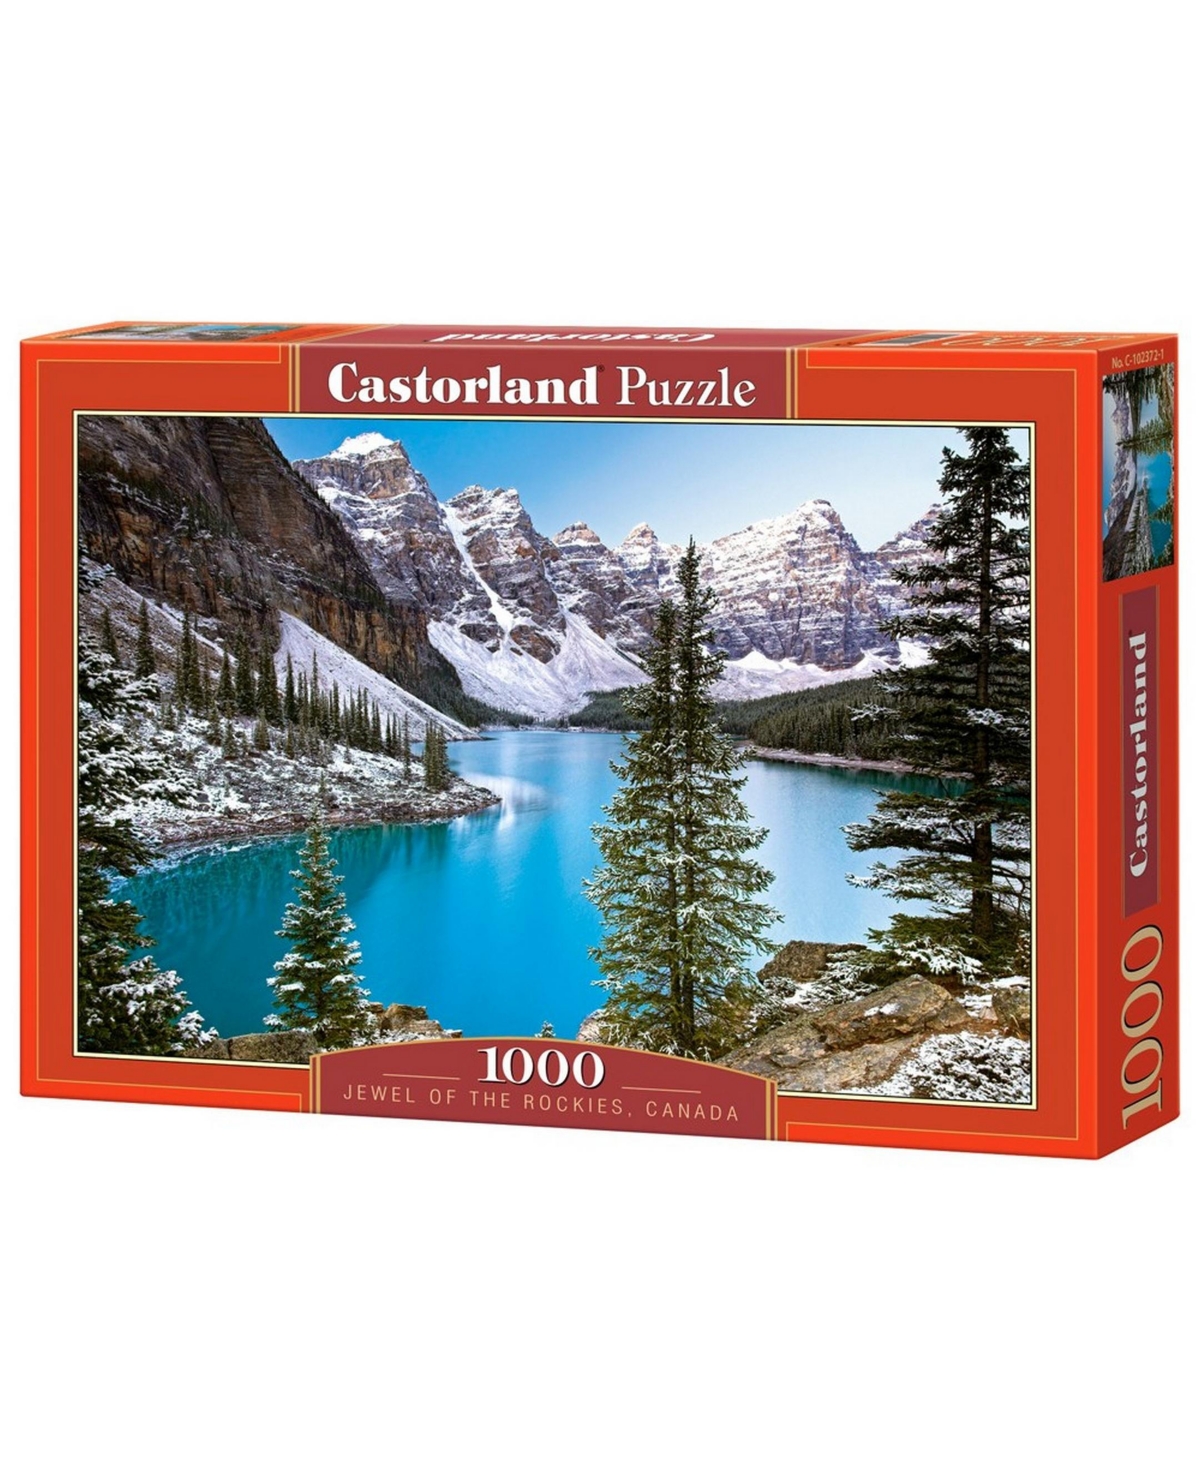 Castorland The Jewel Of The Rockies, Canada Jigsaw Puzzle Set, 1000 Piece In Multicolor